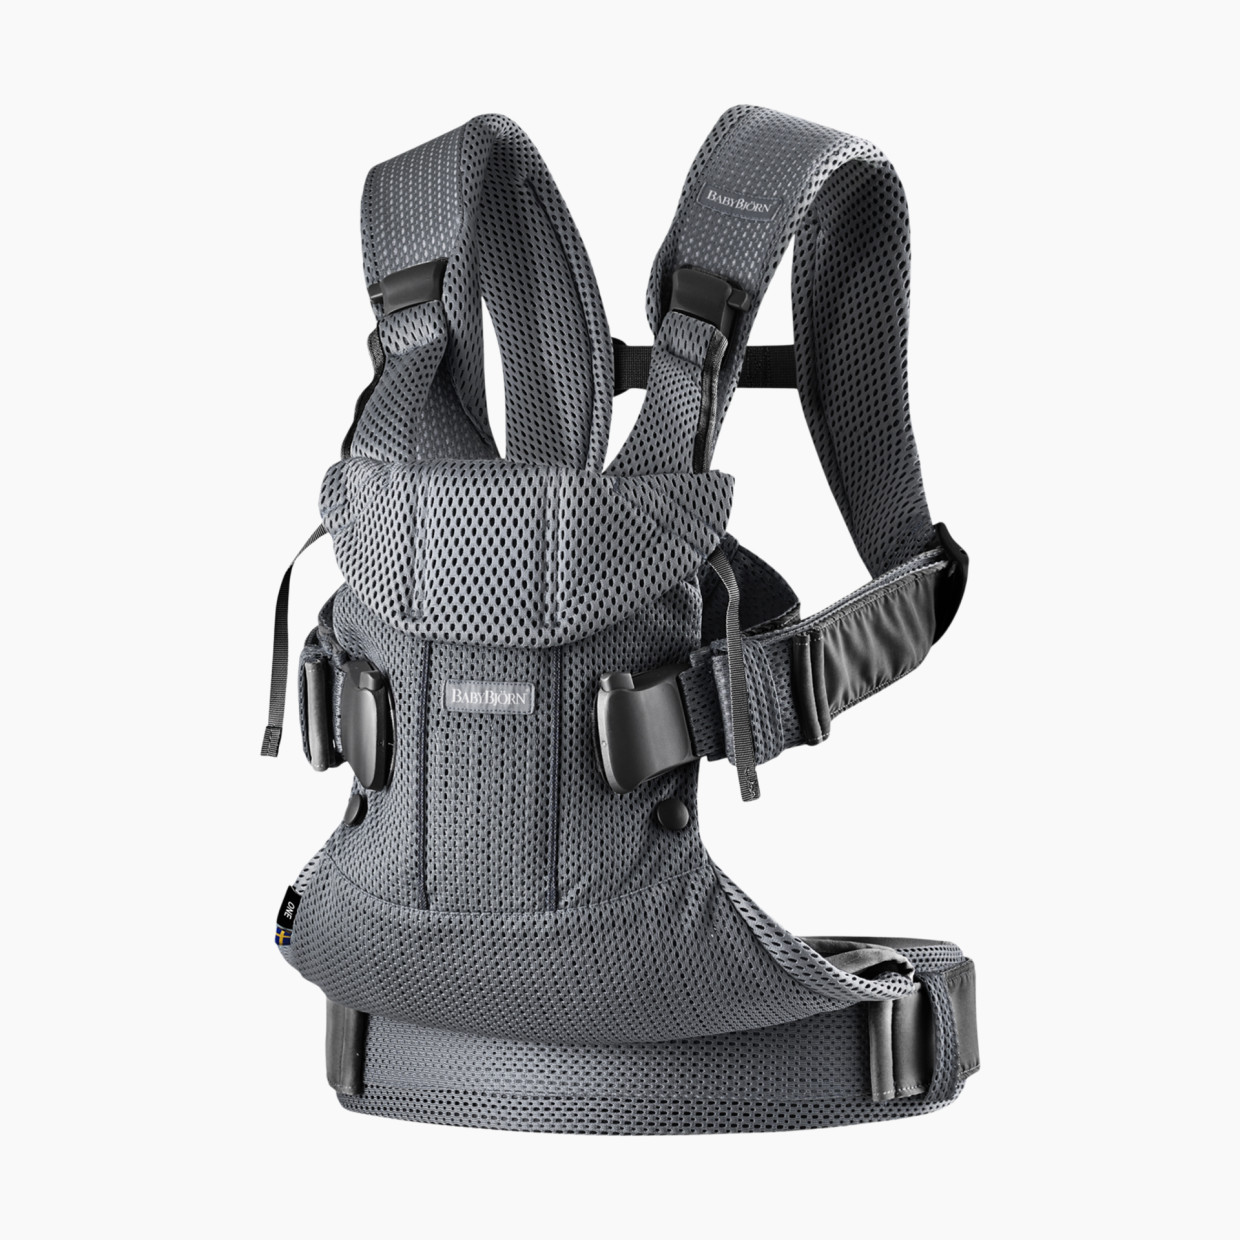 Babybjörn Baby Carrier One Air - Anthracite Mesh.